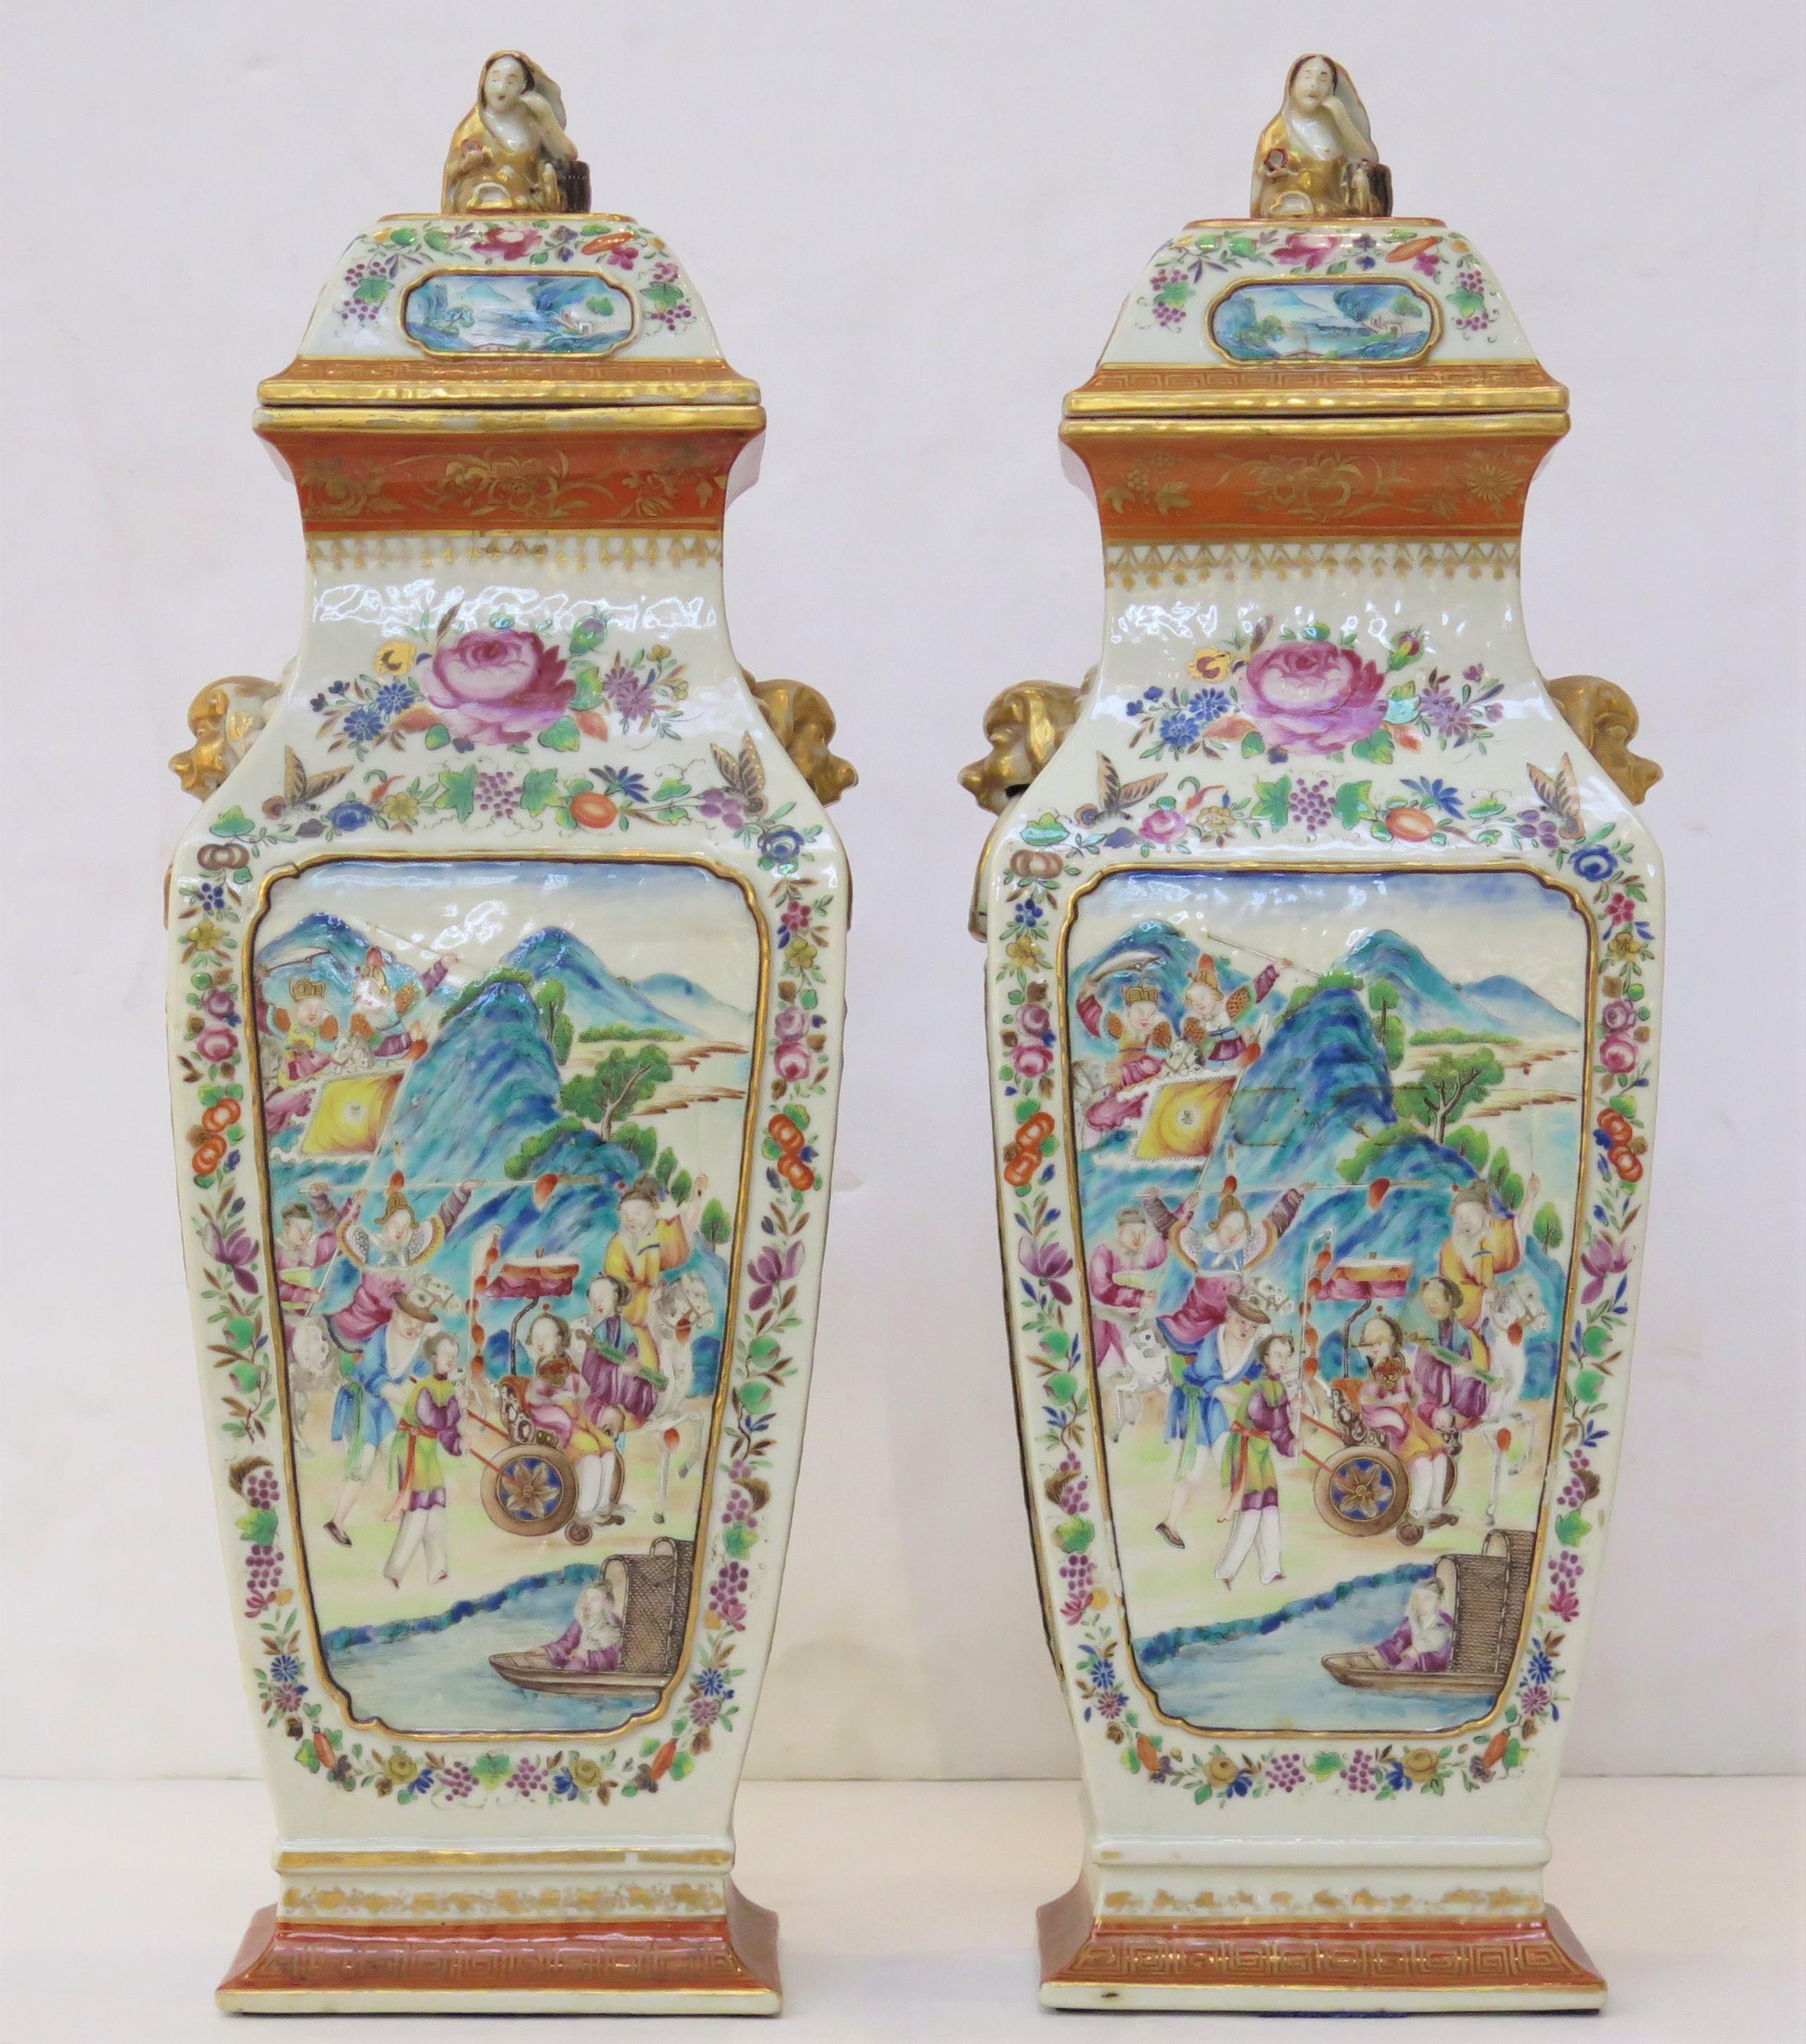 a large pair of Chinese vases, very good quality, each with female figures as finials, seated next to garden seats, and foo lion mask handles at the neck, panels depicting a royal surrounded by royal courtesans and attendants, China, 19th century